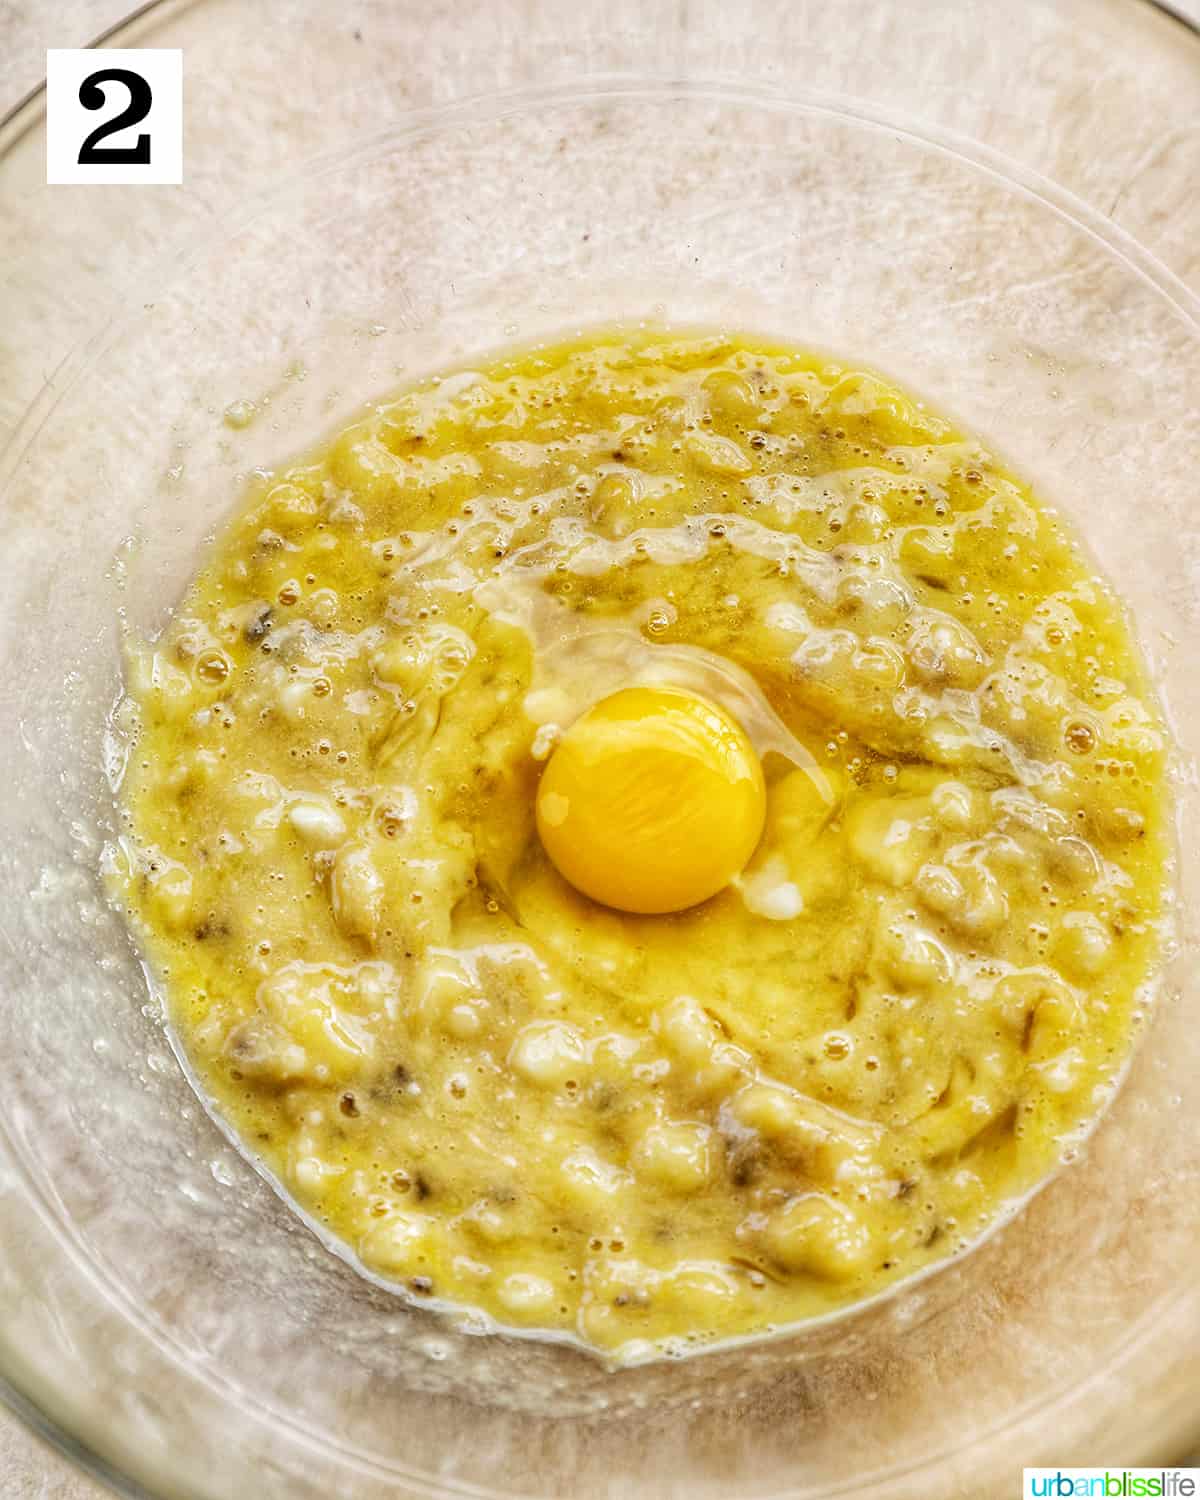 mashed bananas with eggs in a clear bowl.